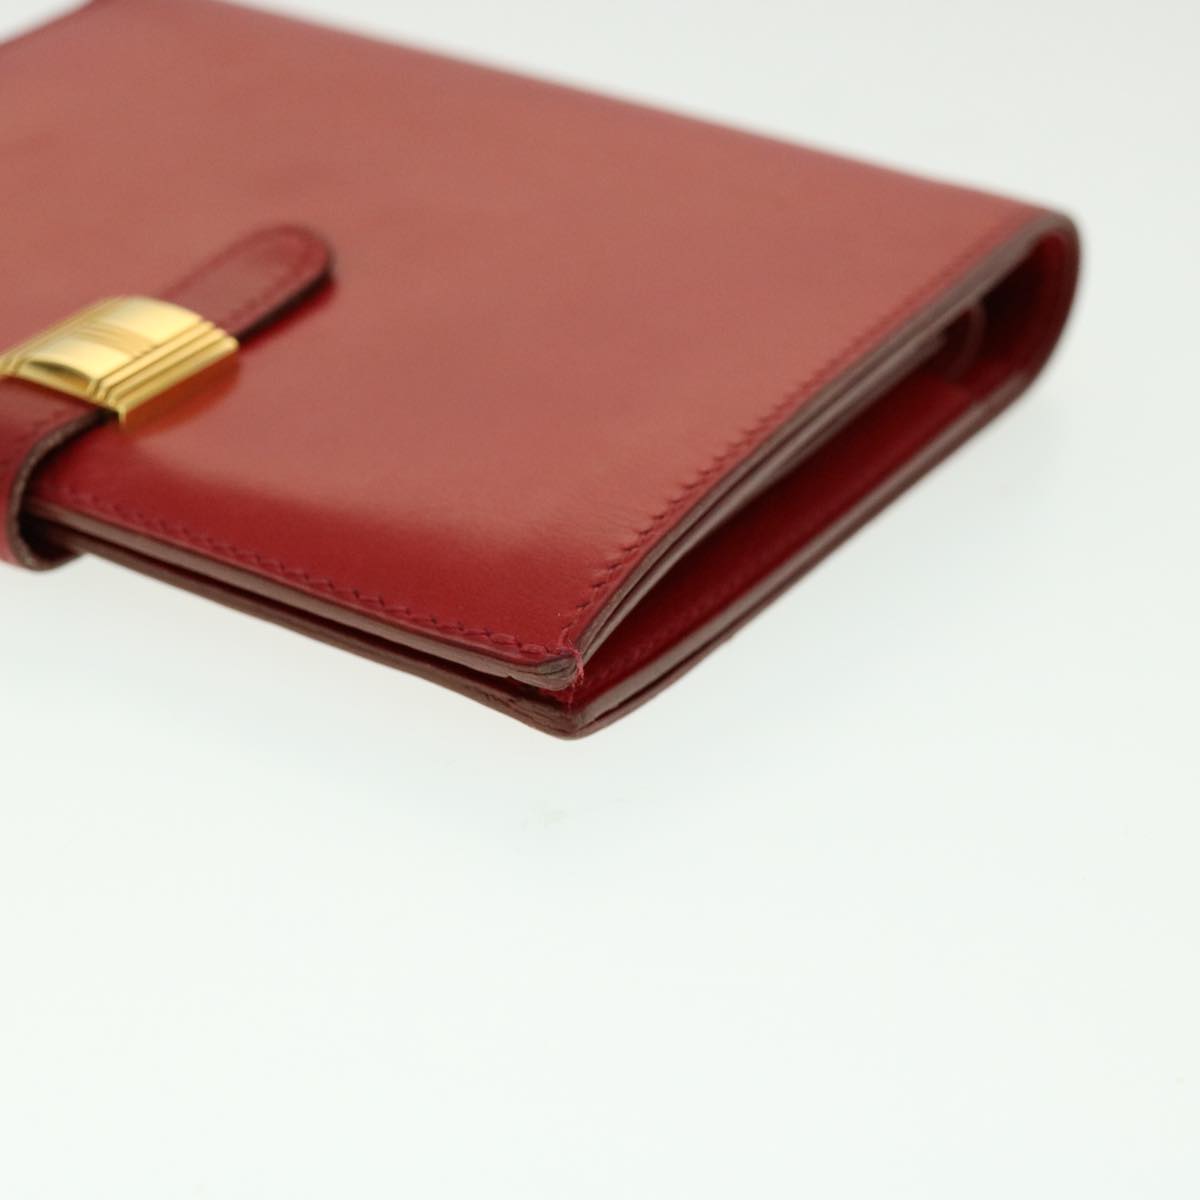 HERMES Saumur Diane Compact Wallet Leather Red Auth 30923